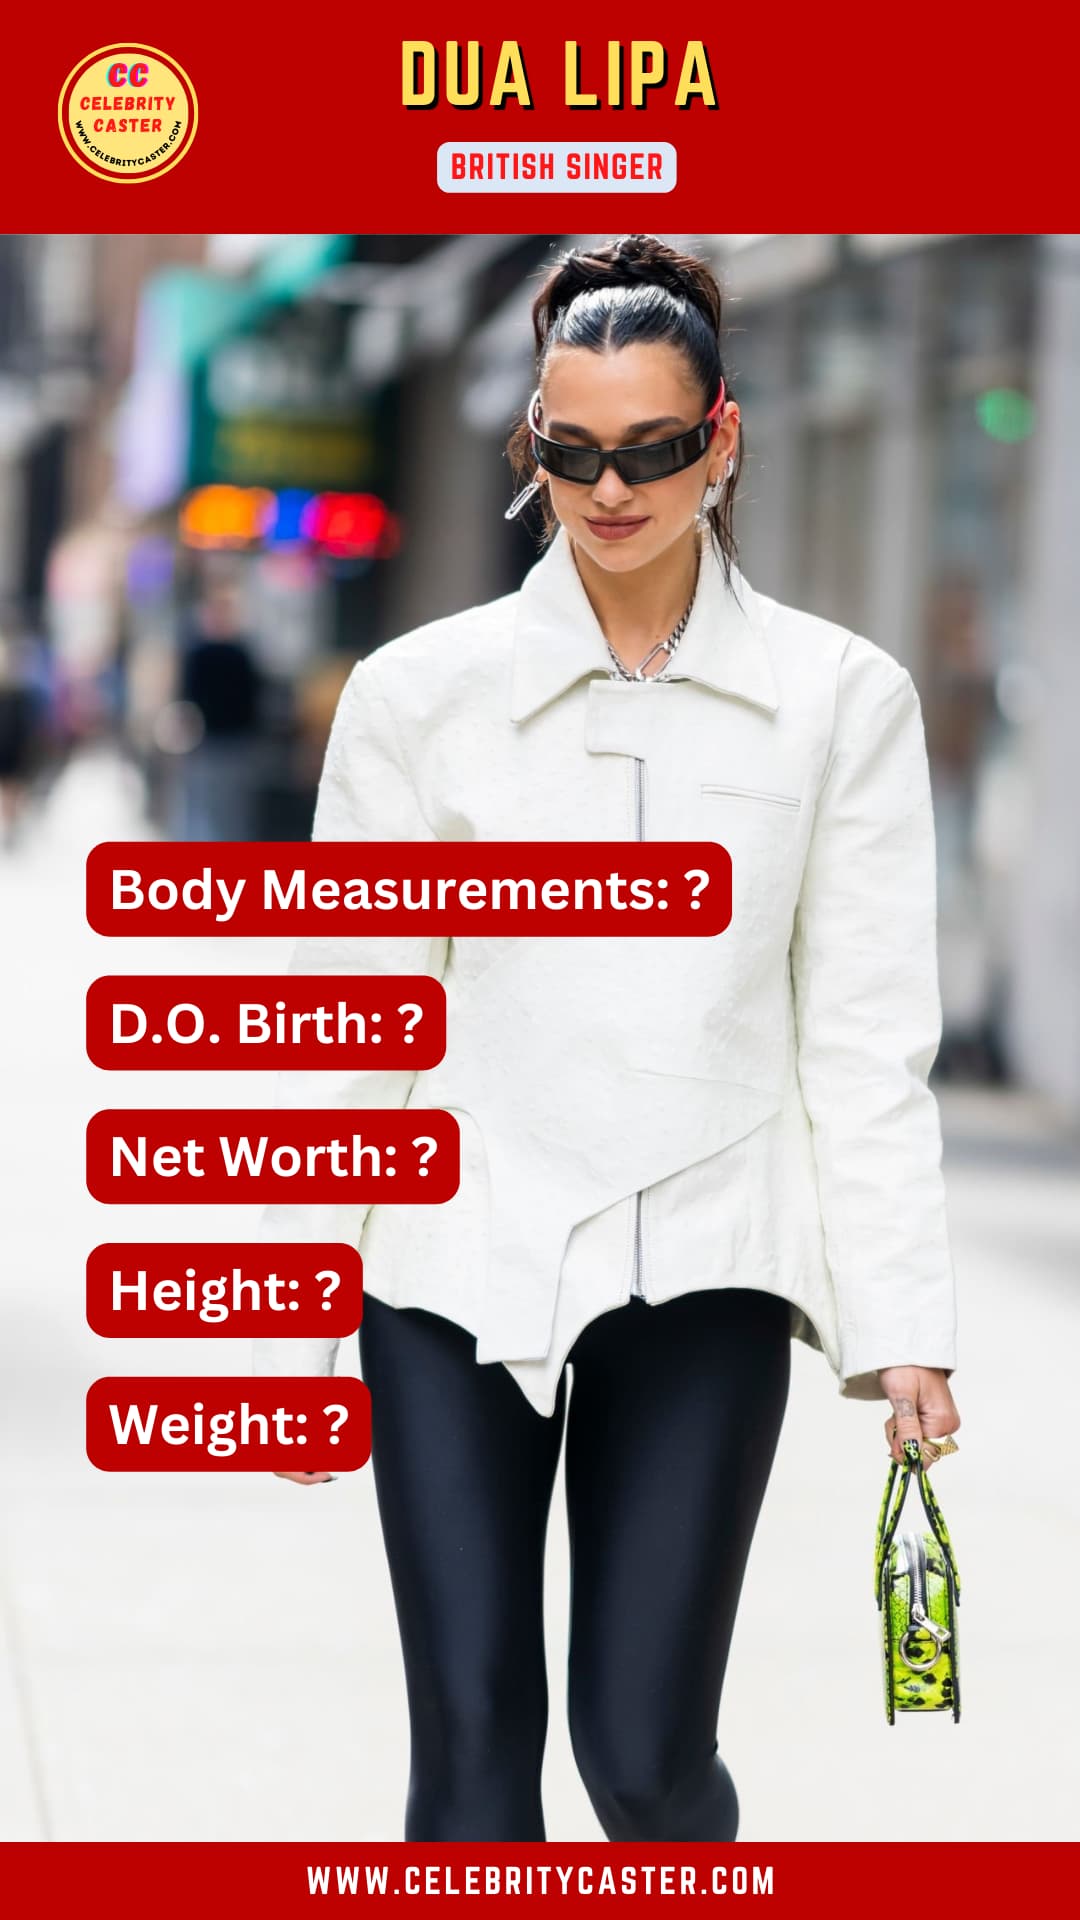 CELEBRITY CASTER is going to unfold her beautiful Dua Lipa Singer Biography and her other body statistics like weight, and Dua Lipa age!